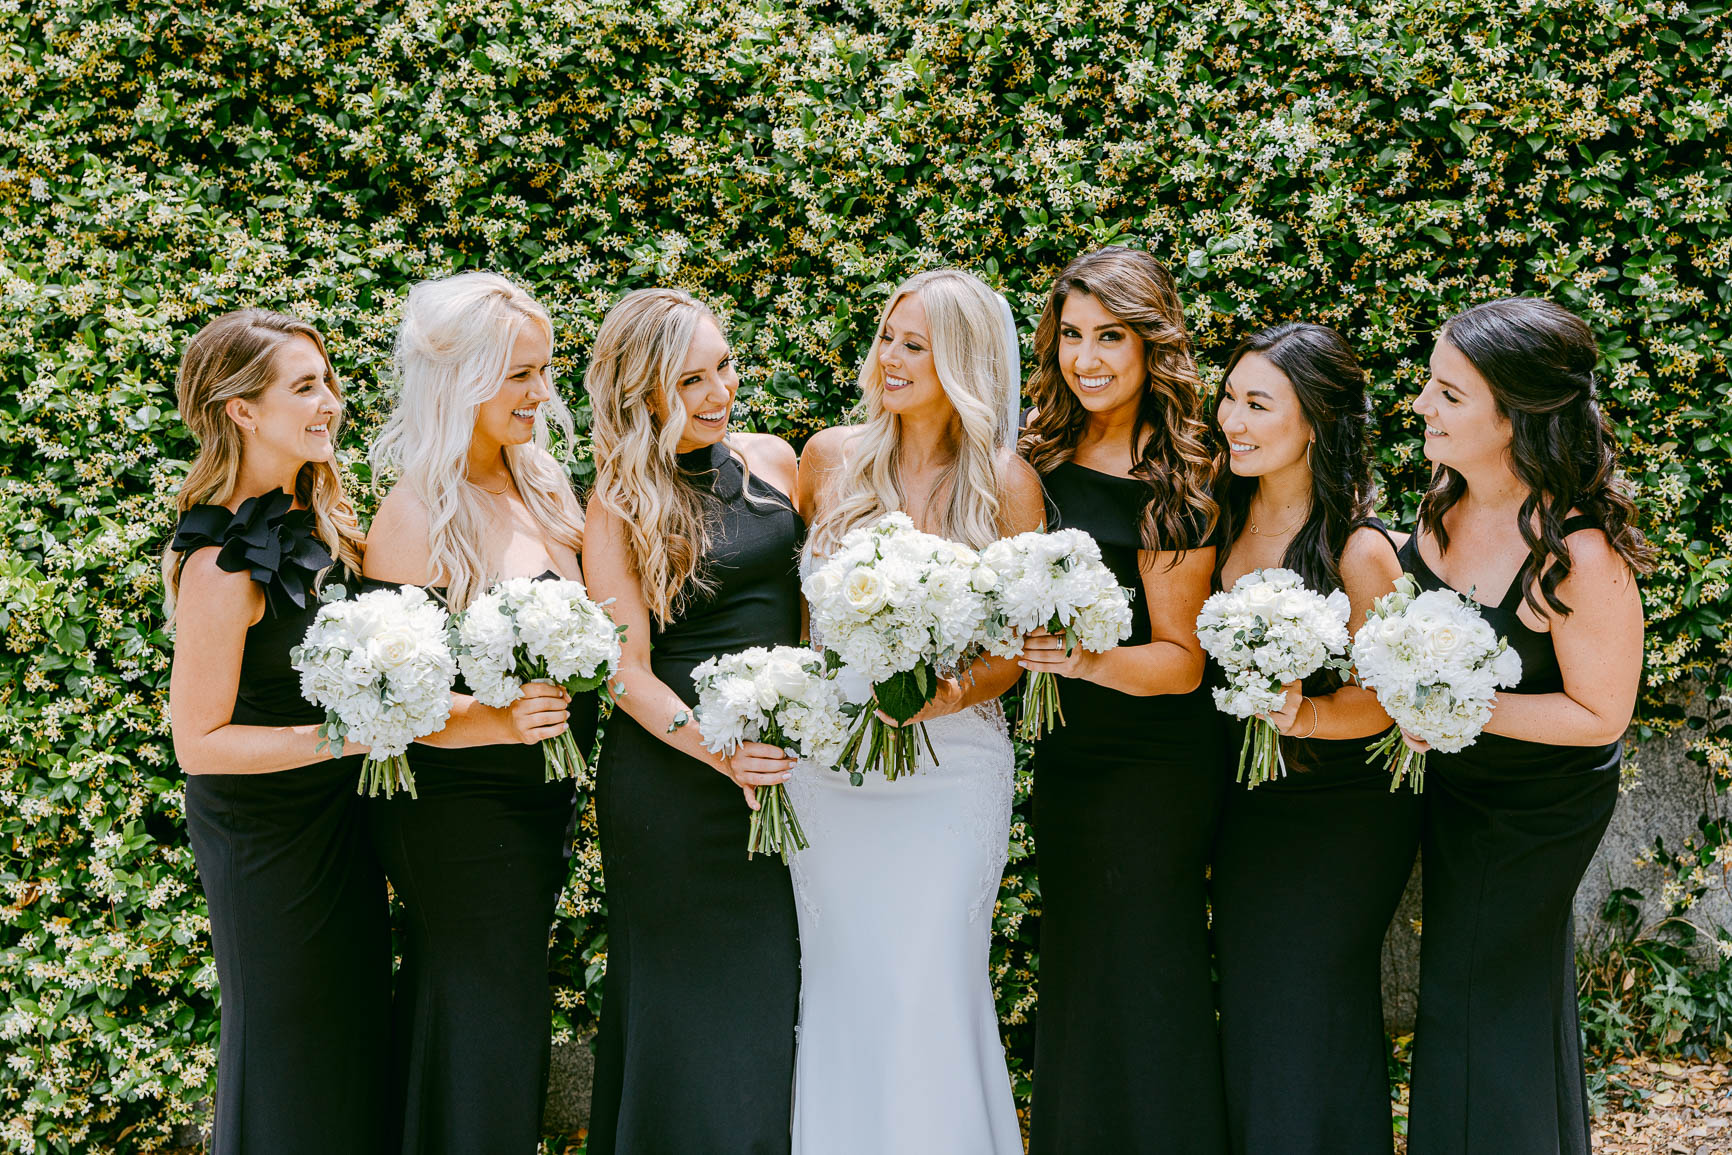 classic bride and bridesmaid photos in uptown Charlotte nc shot by Nhieu Tang Photography | nhieutang.com